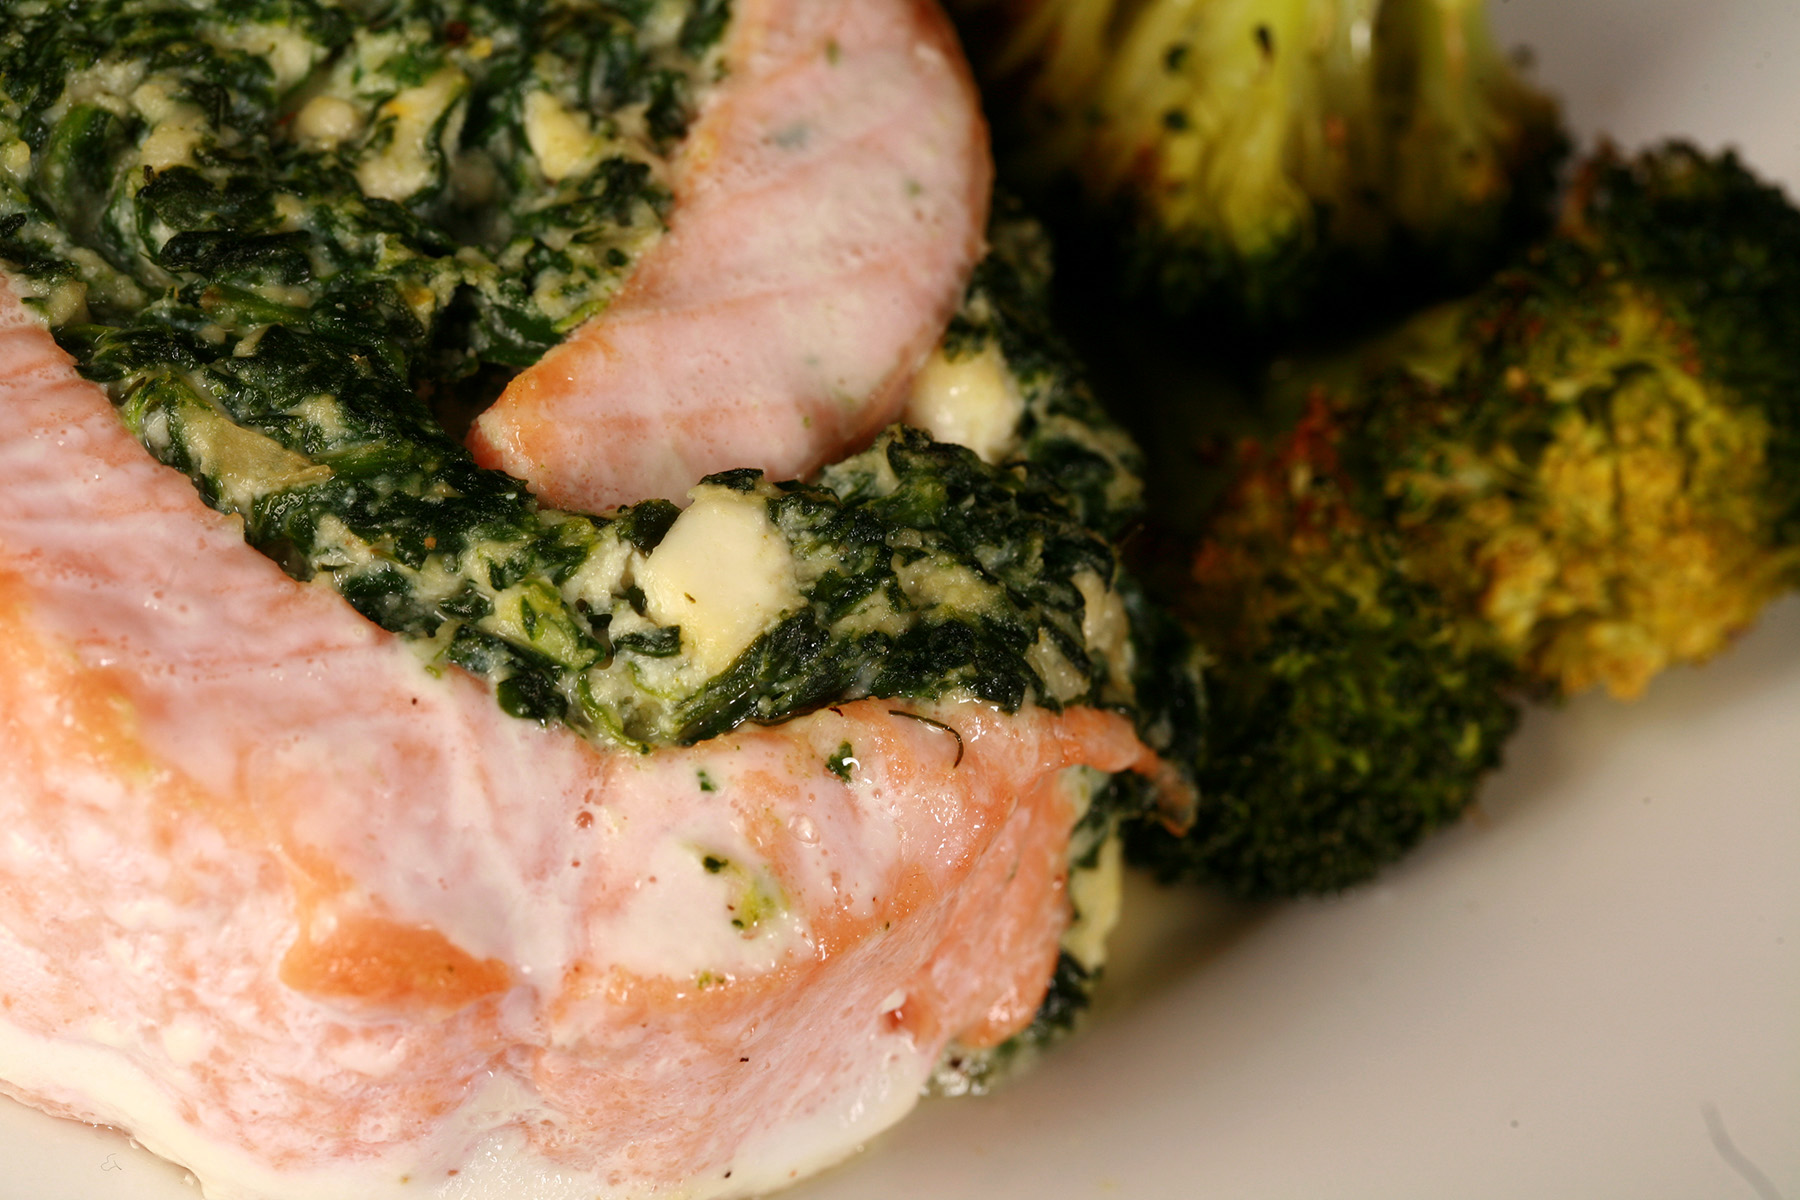 A serving of spinach and feta stuffed salmon, along with some roasted broccoli on a plate.